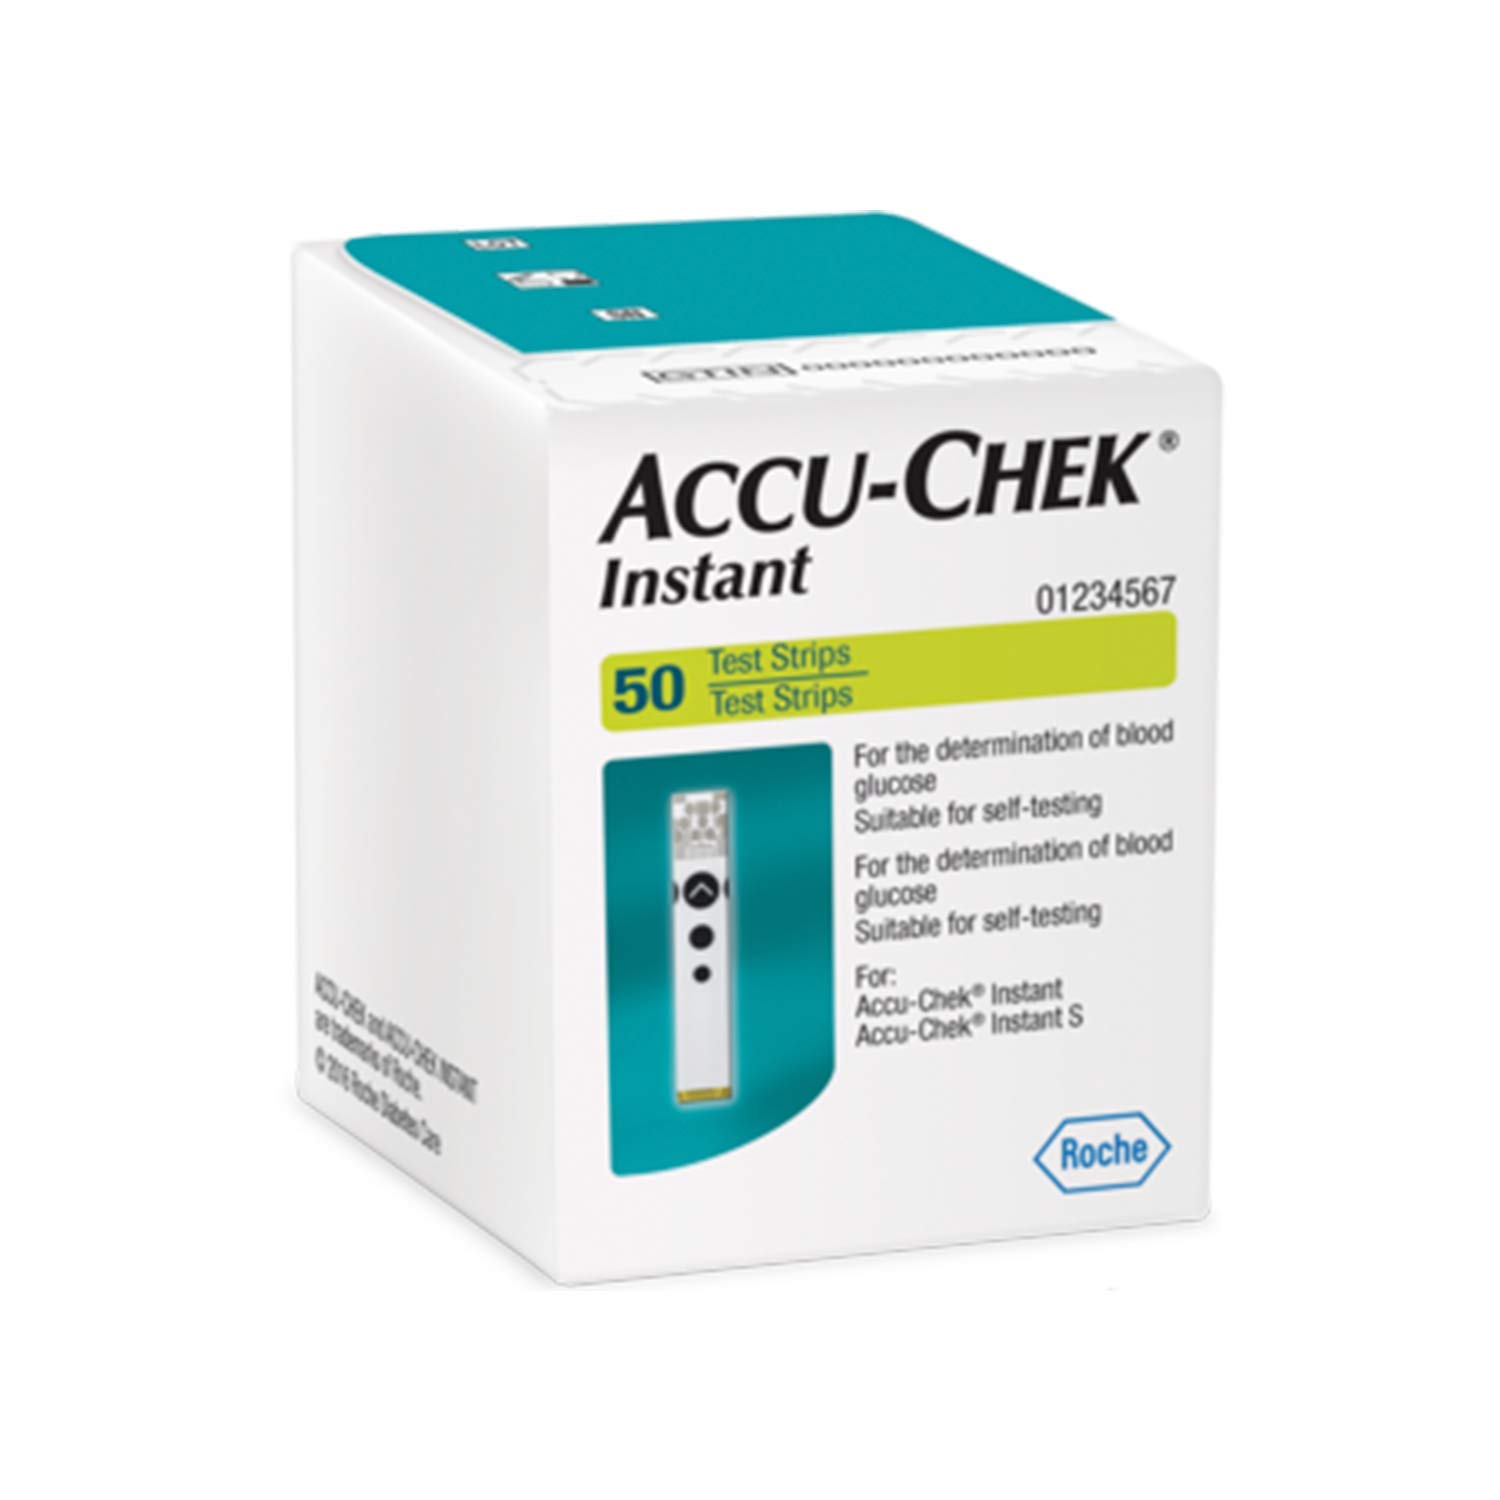 Image of Accu-Chek Instant Roche 50 Test Strips